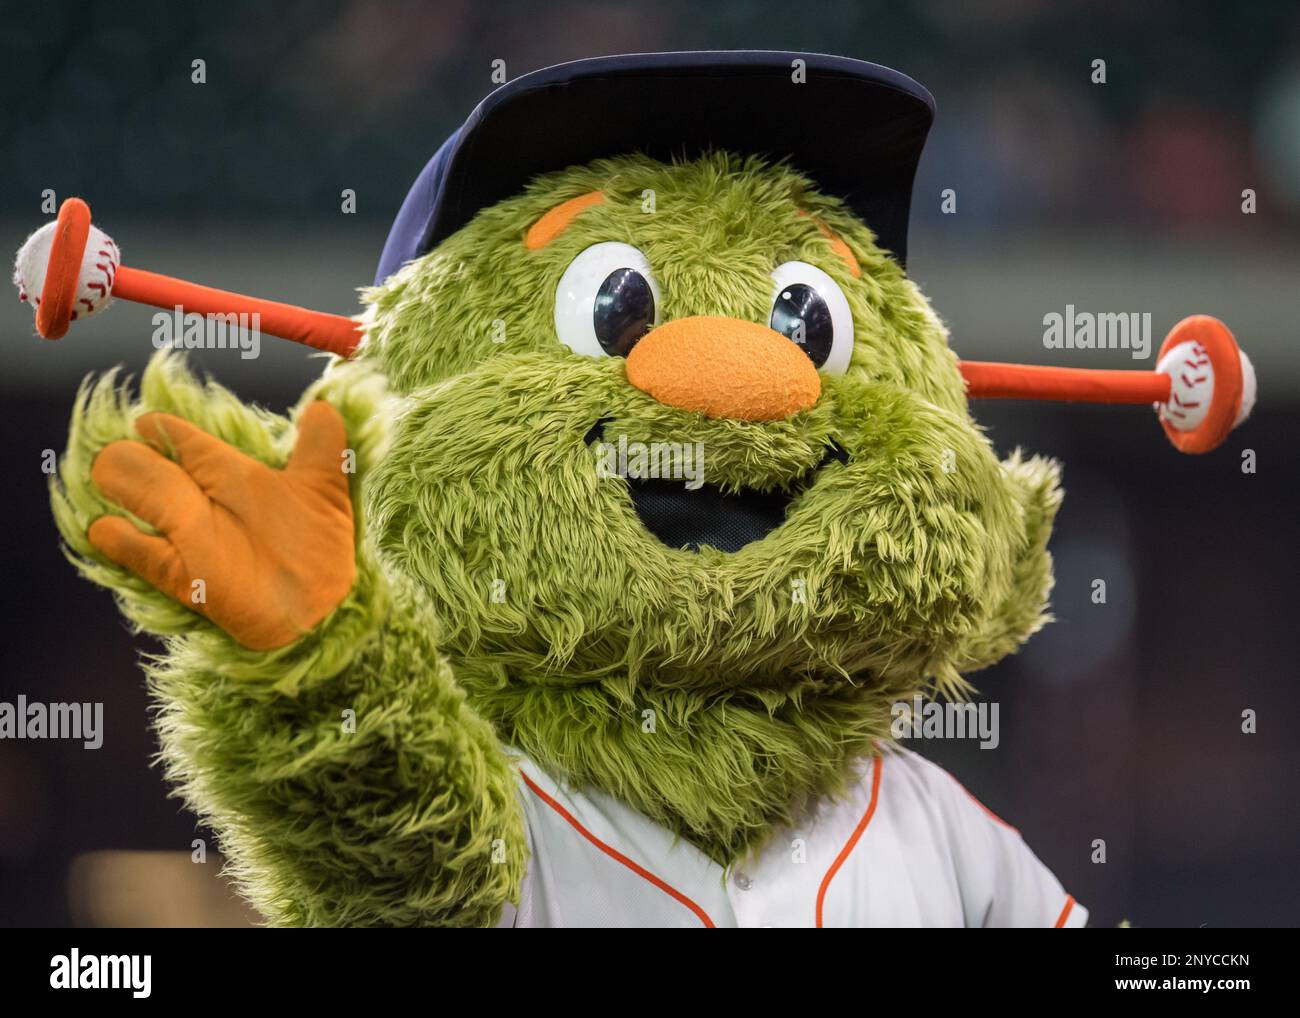 May 28, 2013 - Houston, Texas, United States of America - MAY 28 2013: '' Orbit'', the Houston Astros' mascot, performs for the fans prior to the MLB  interleague baseball game between the